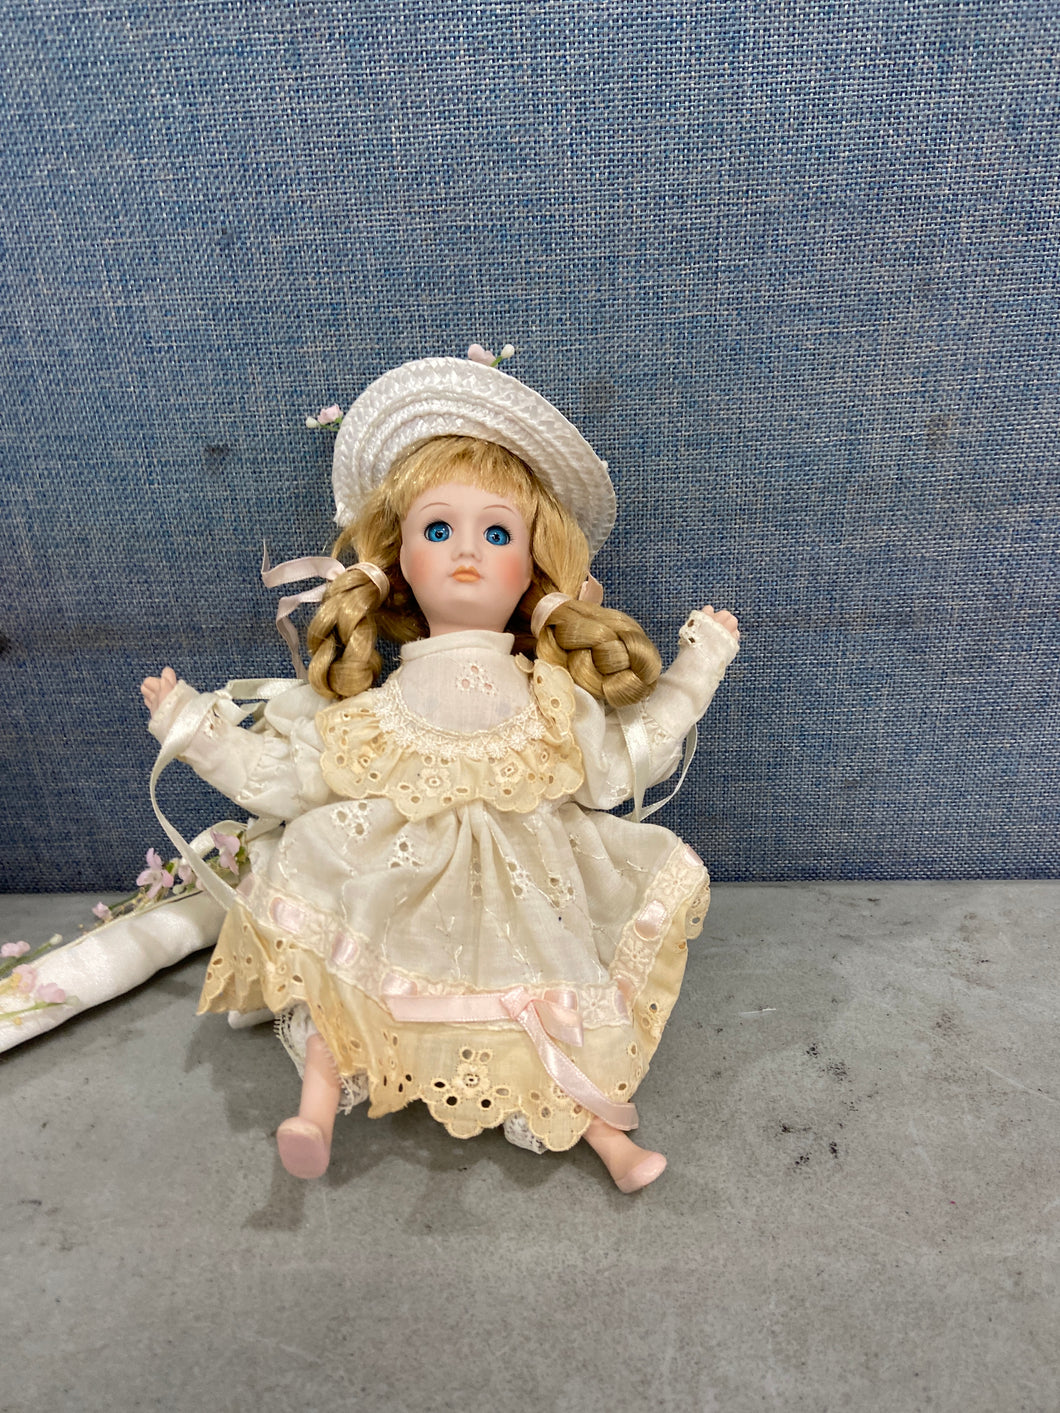 Ceramic Doll Brown Hair Blue Eyes Dressed Up With Hat